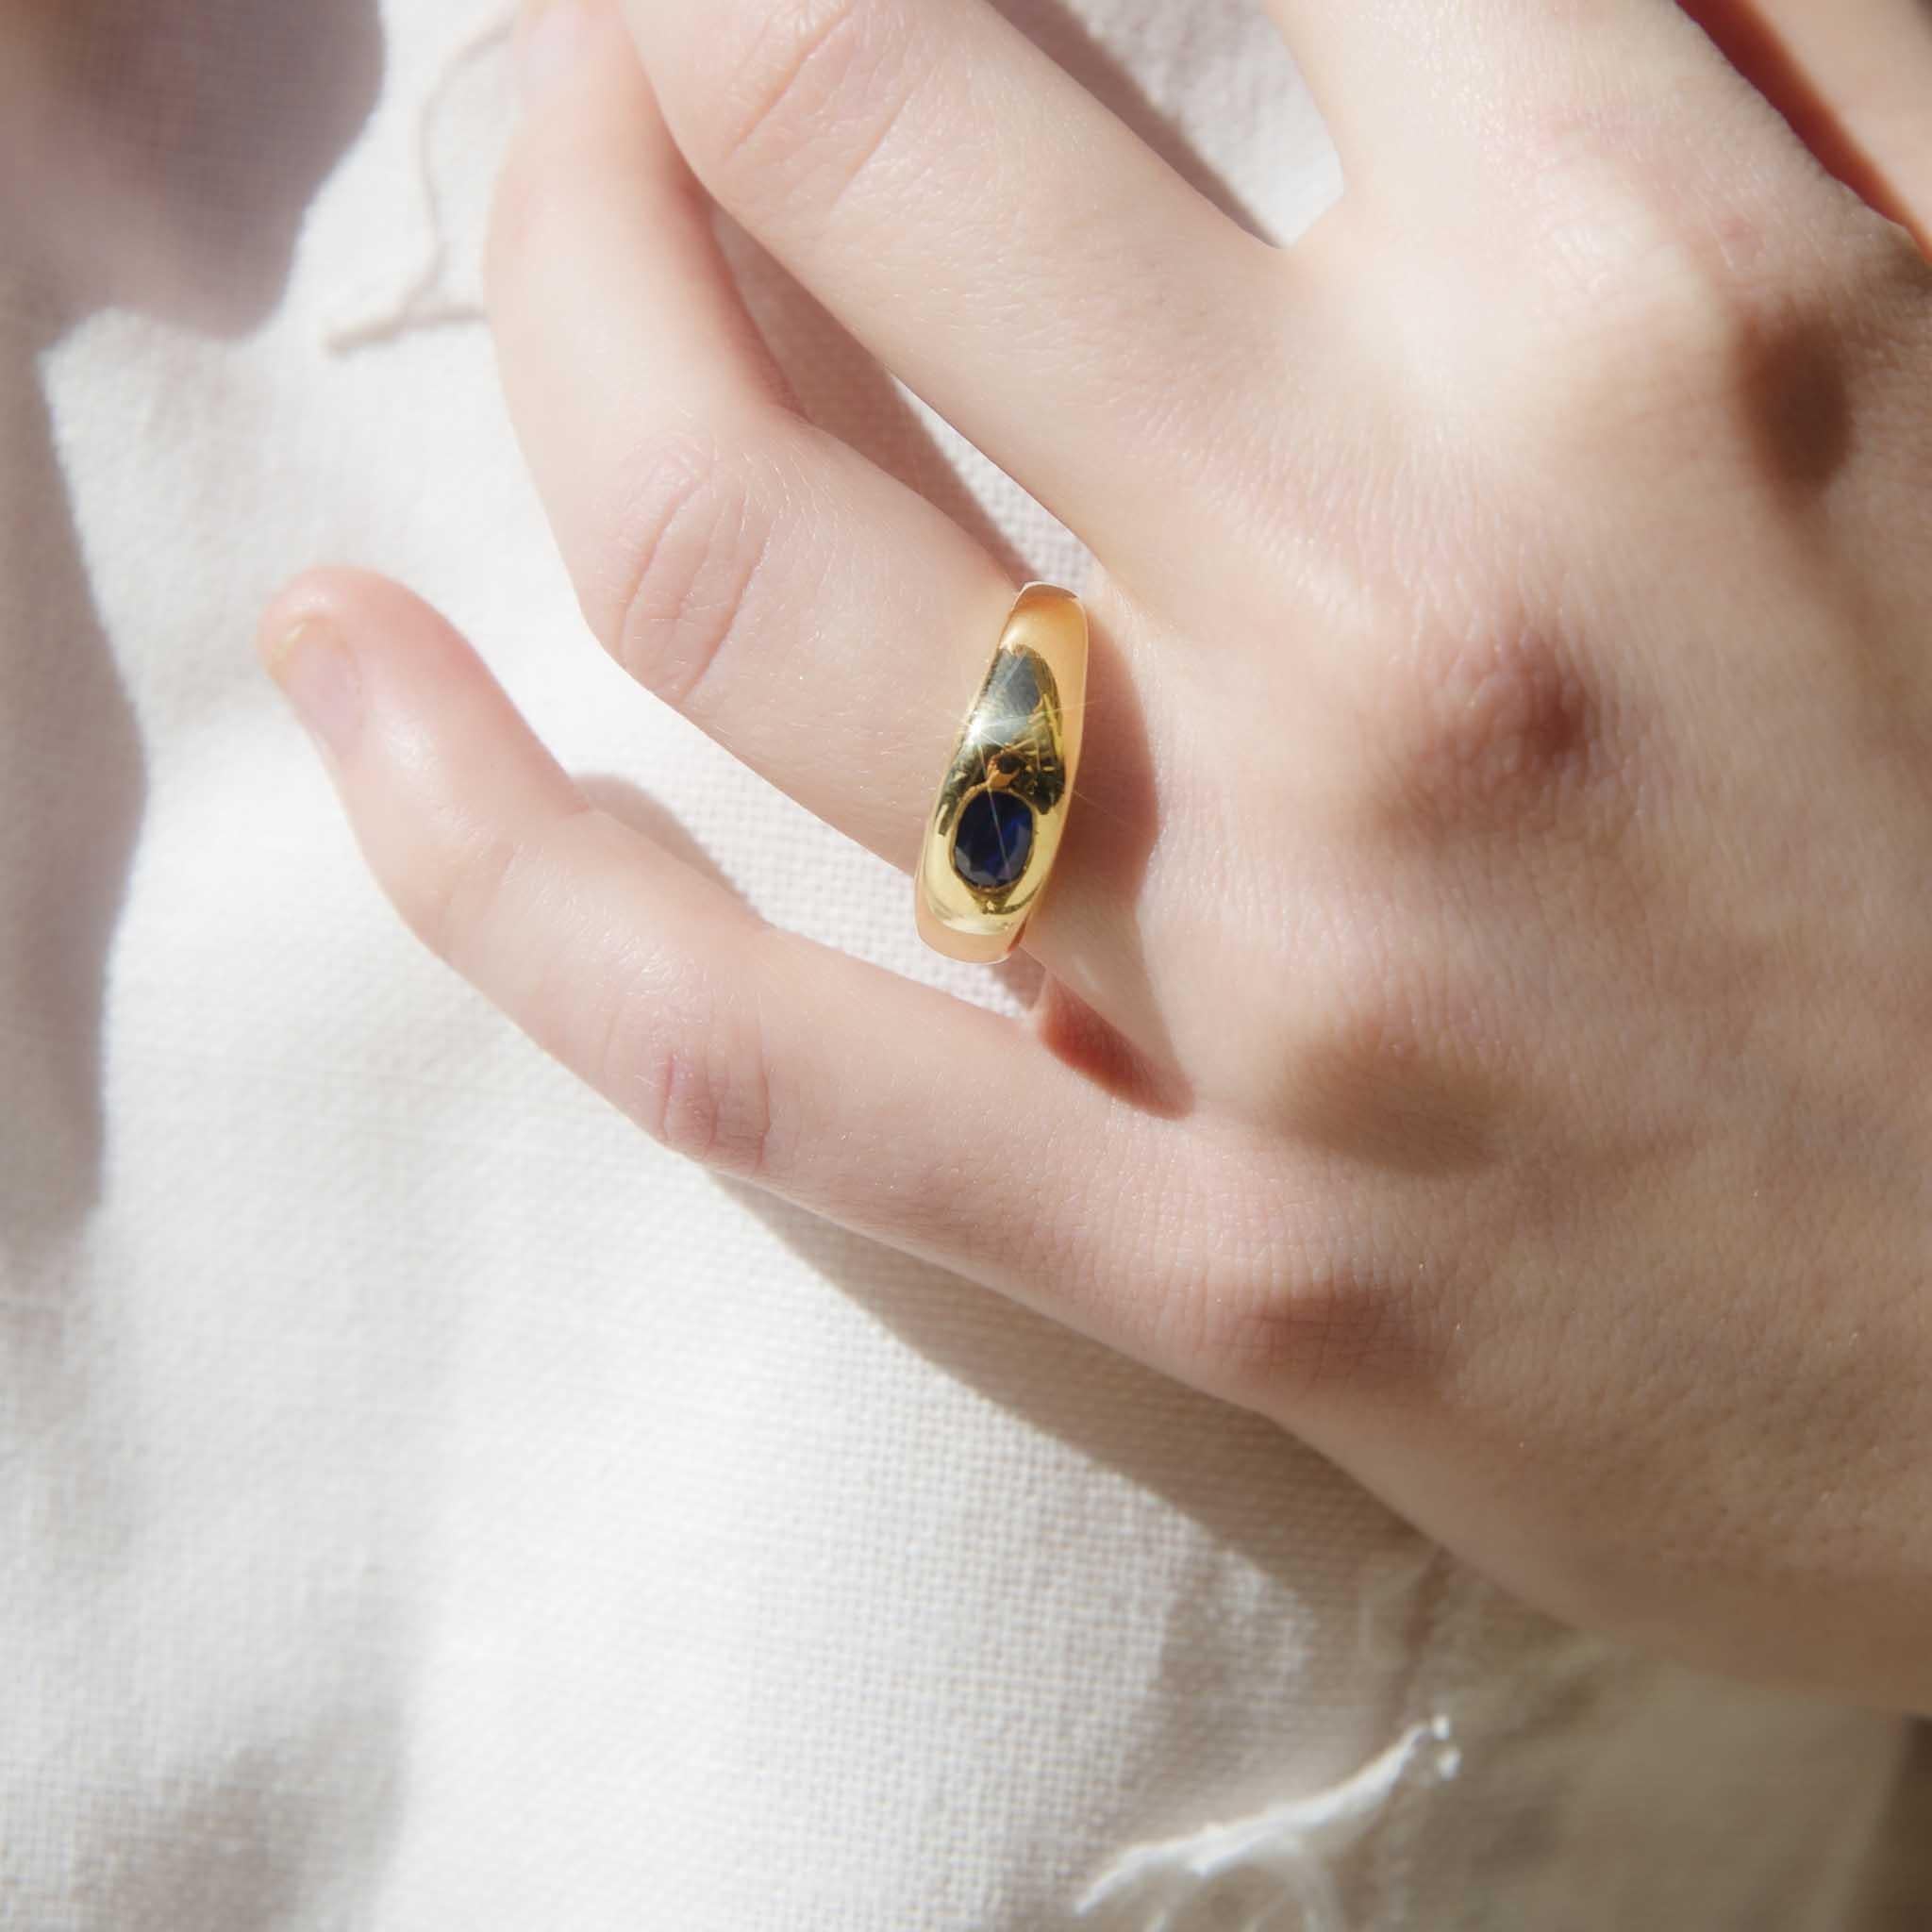 Forged in 9 carat gold, The Nadya Ring is crafted with restraint to allow the deep blue sapphire to shine.  Sometimes the simplest of design is the most audacious.

The Nadya Ring Gem Details
The deep blue oval sapphire is estimated to weigh 0.66